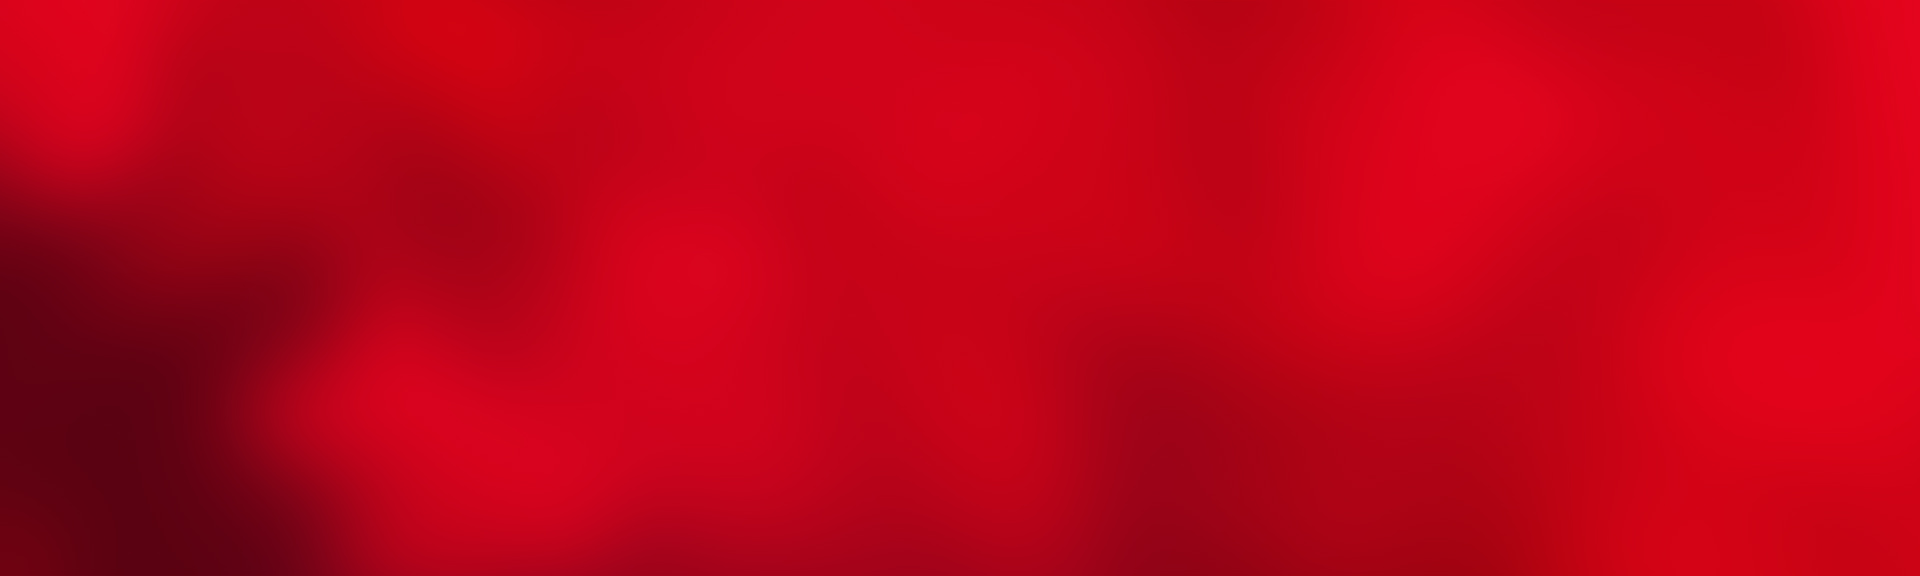 banner-red